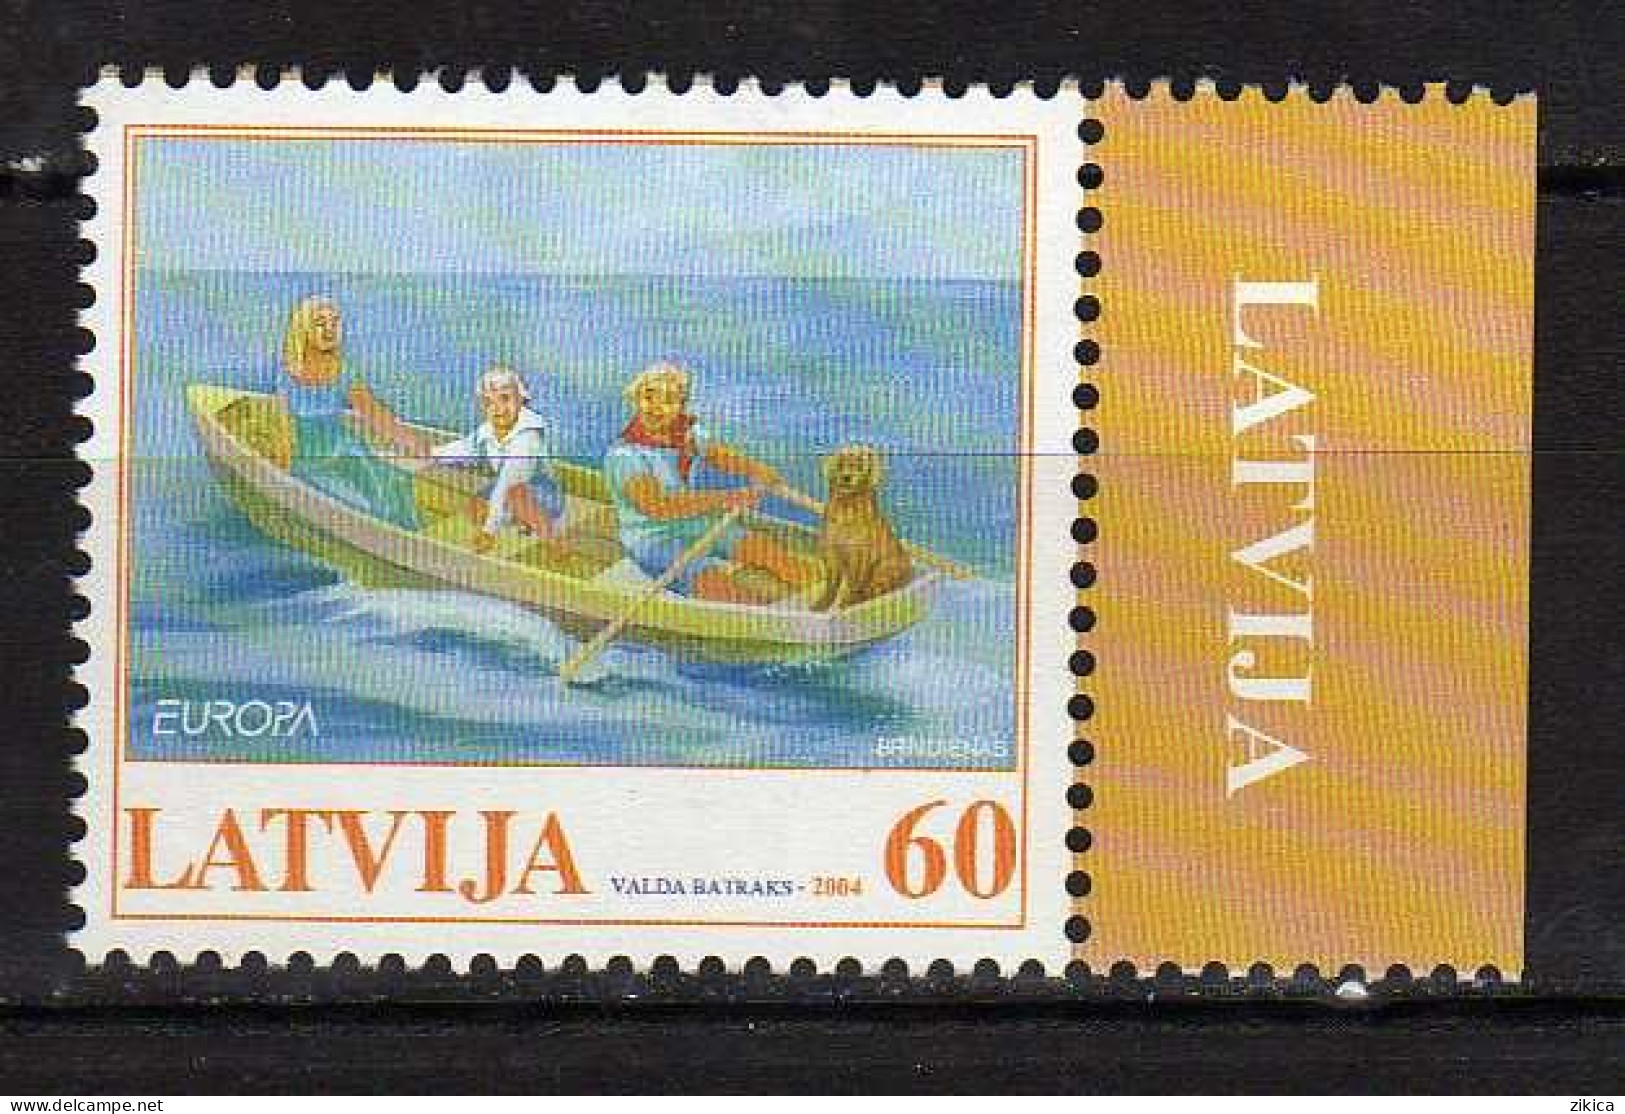 Latvia - 2004 EUROPA CEPT Stamps - Holidays. MNH** - Lettland